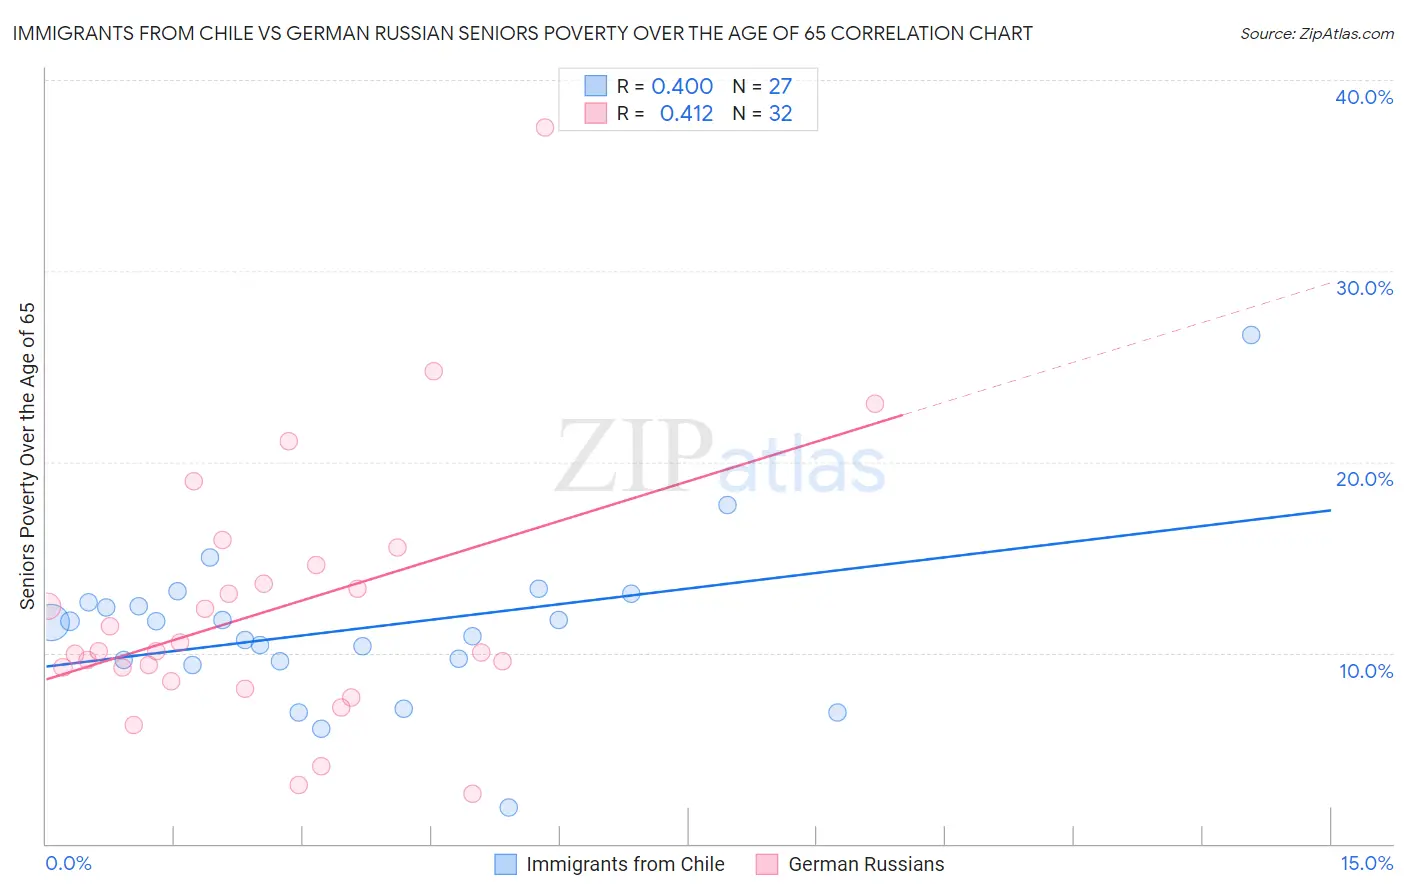 Immigrants from Chile vs German Russian Seniors Poverty Over the Age of 65